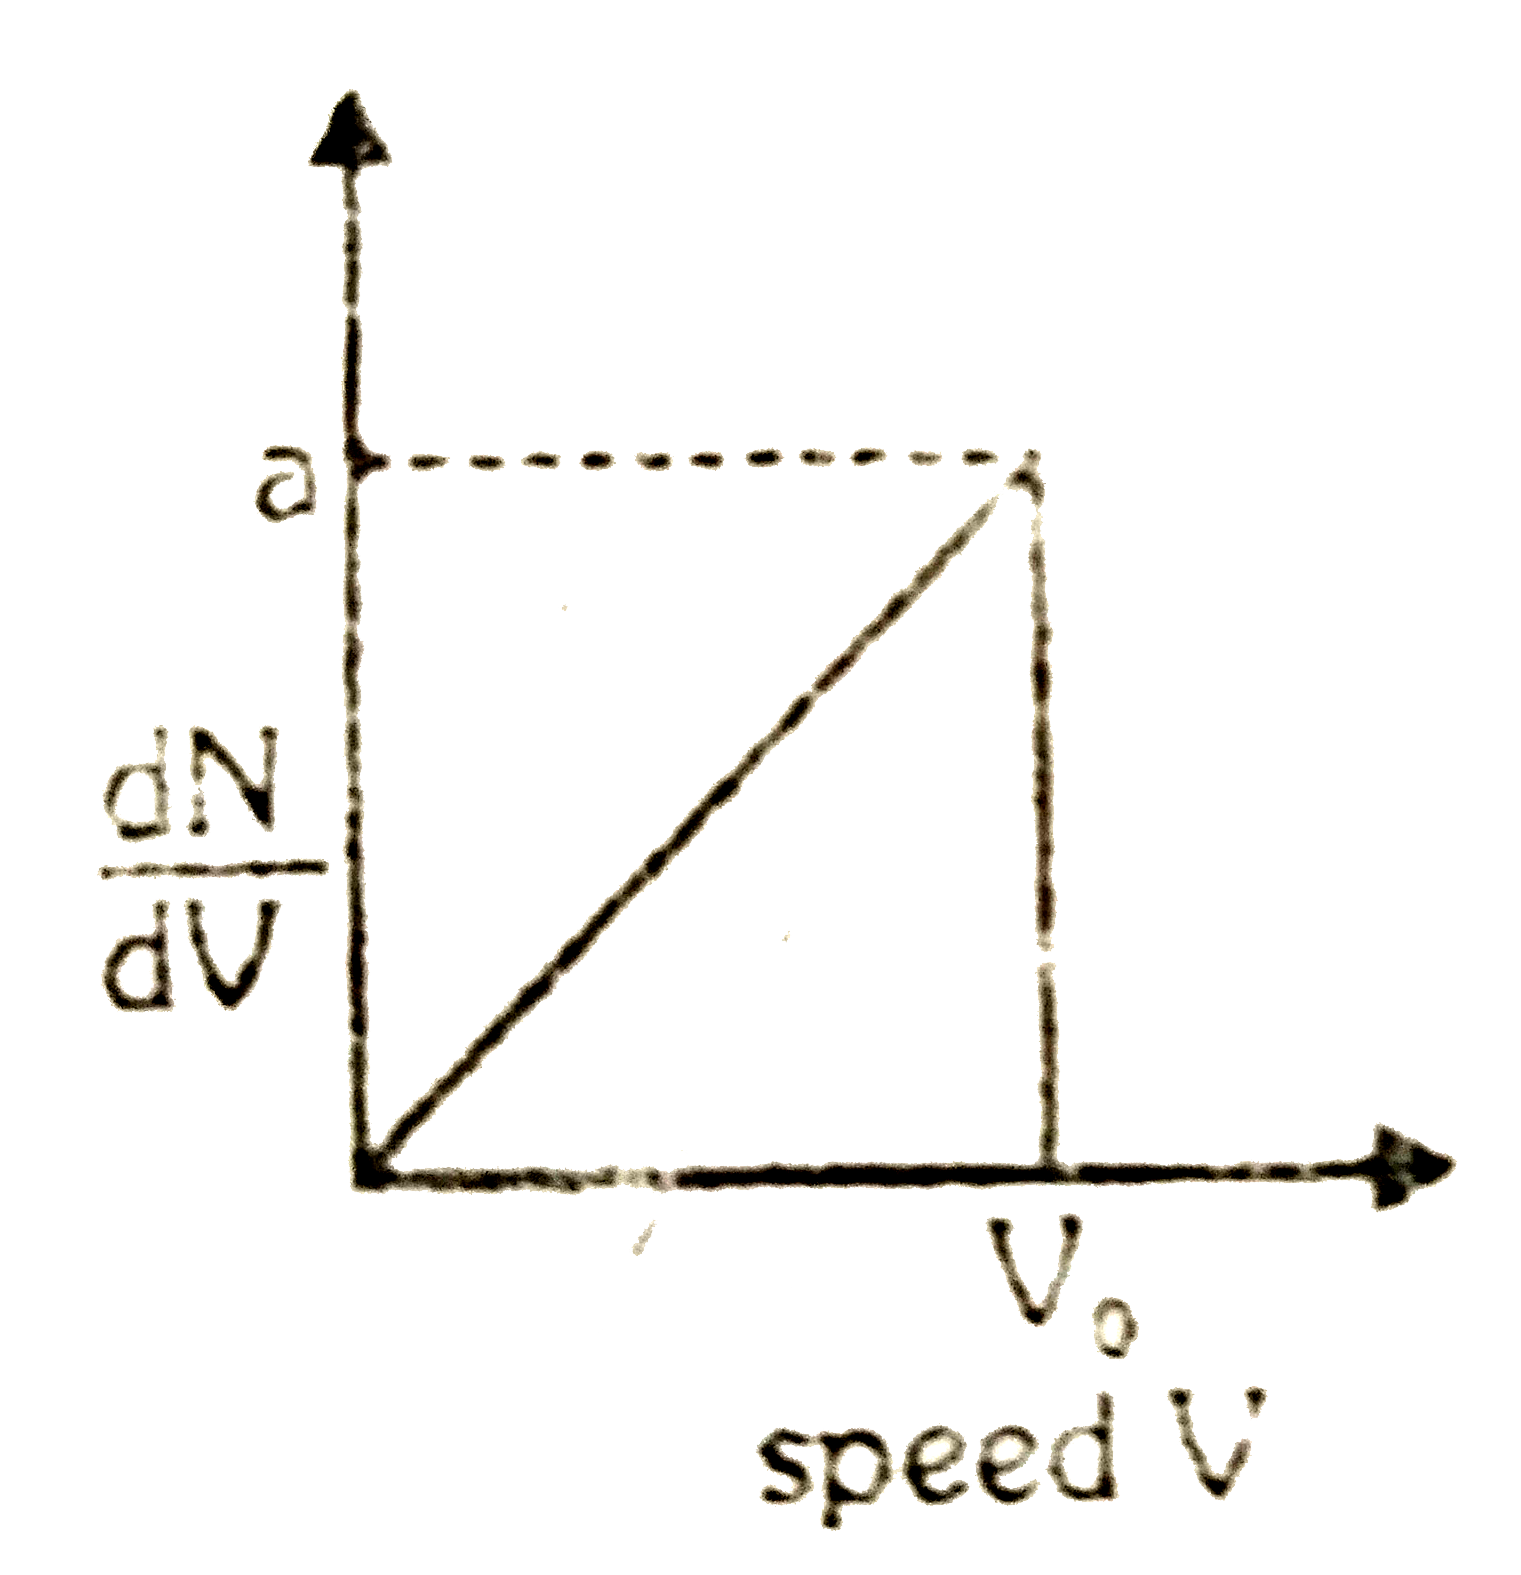 Graph Shows A Hypothetical Speed Distribution For A Sample Of N Ga